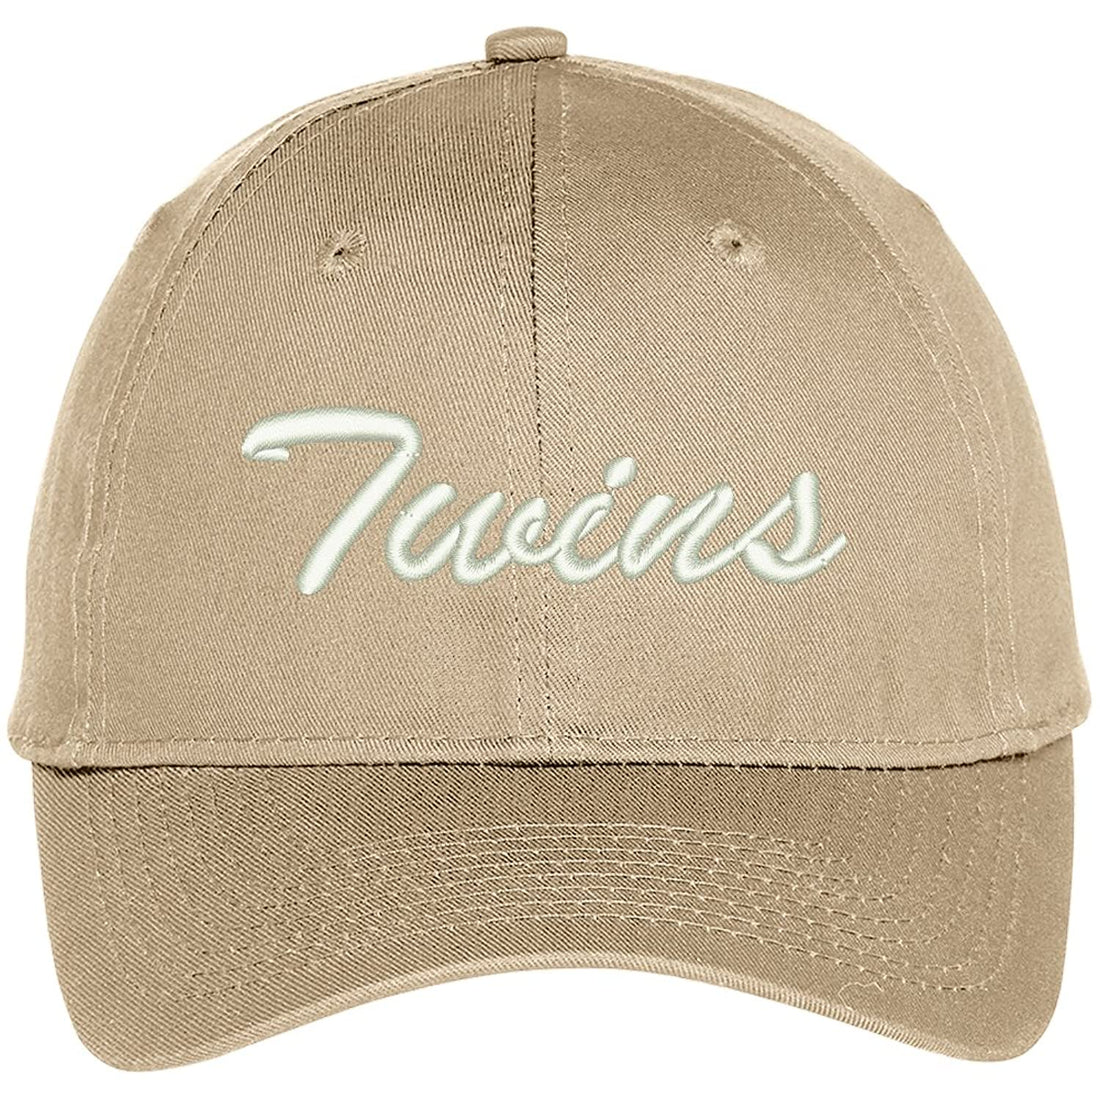 Trendy Apparel Shop Twins Embroidered Precurved Adjustable Cap